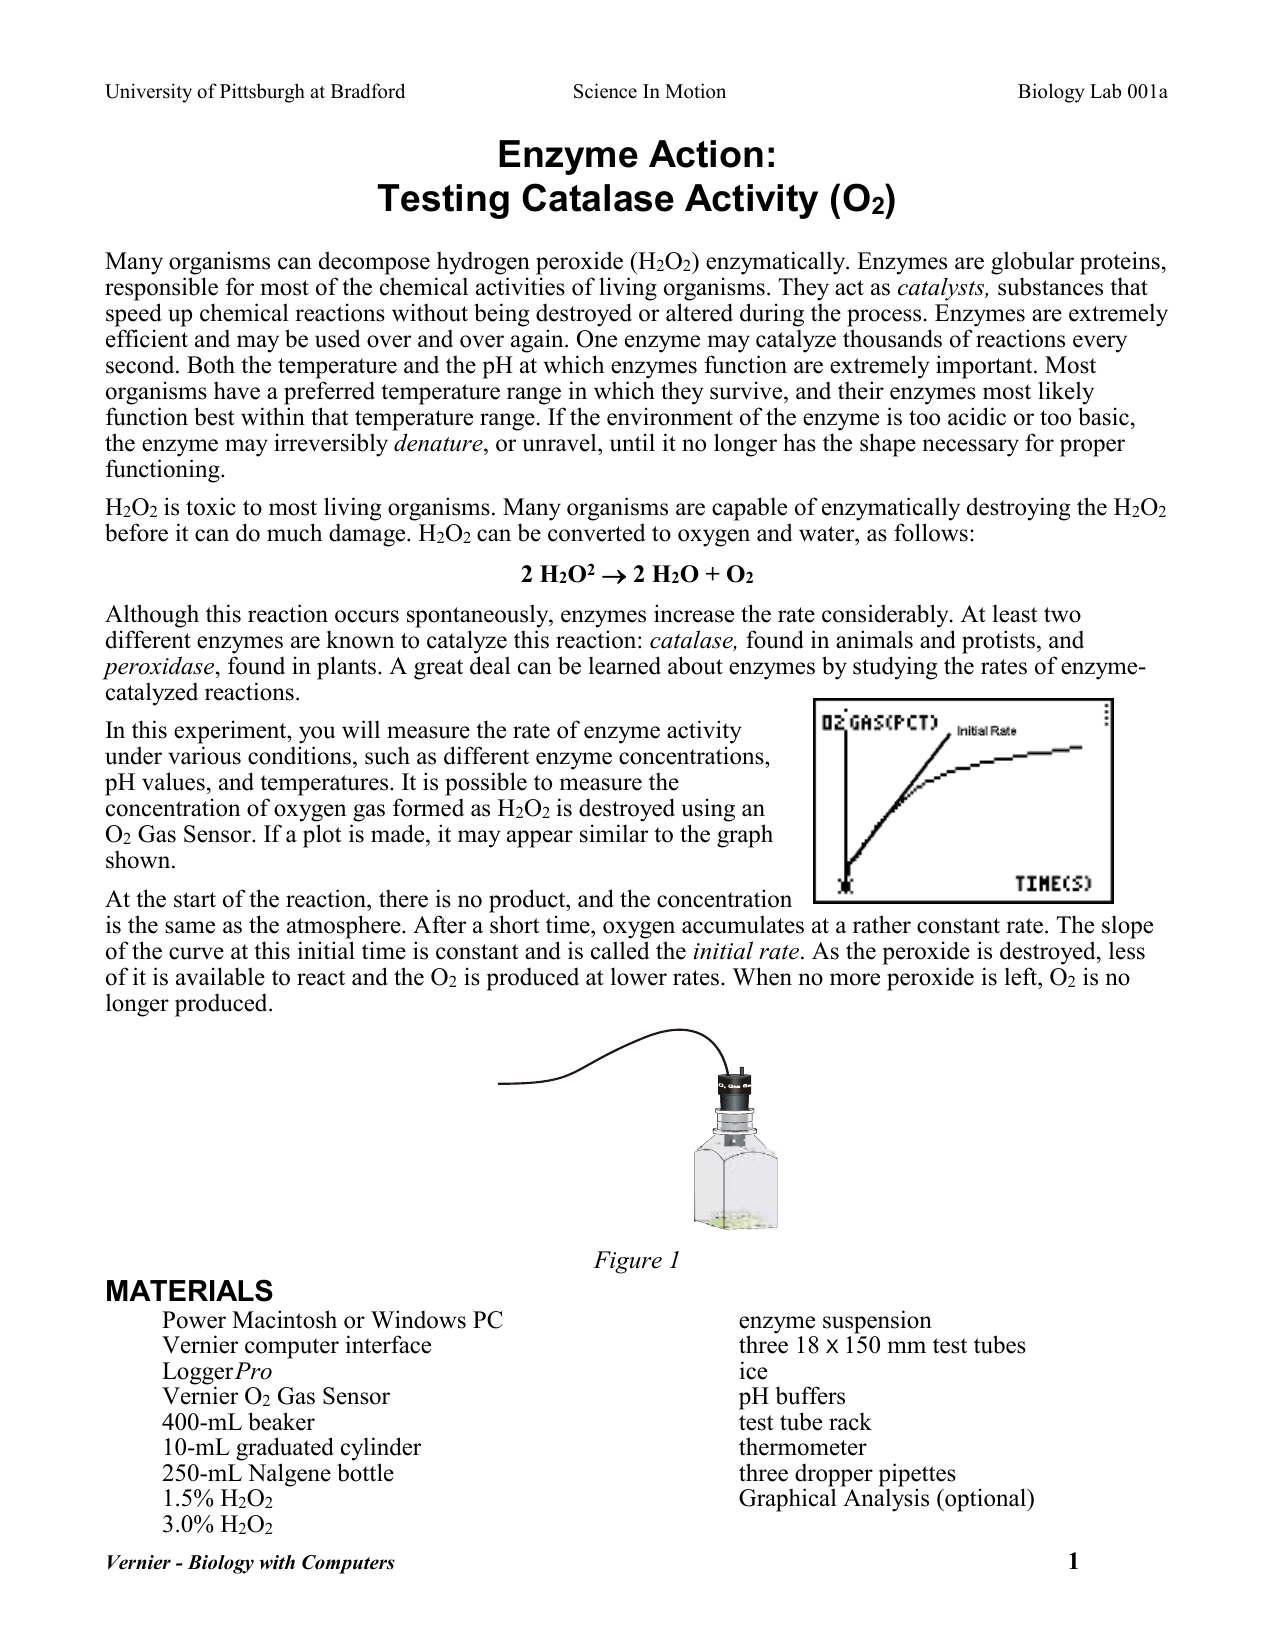 enzyme-action-testing-catalase-activity-answers-enzyme-action-testing-catalase-activity-lab